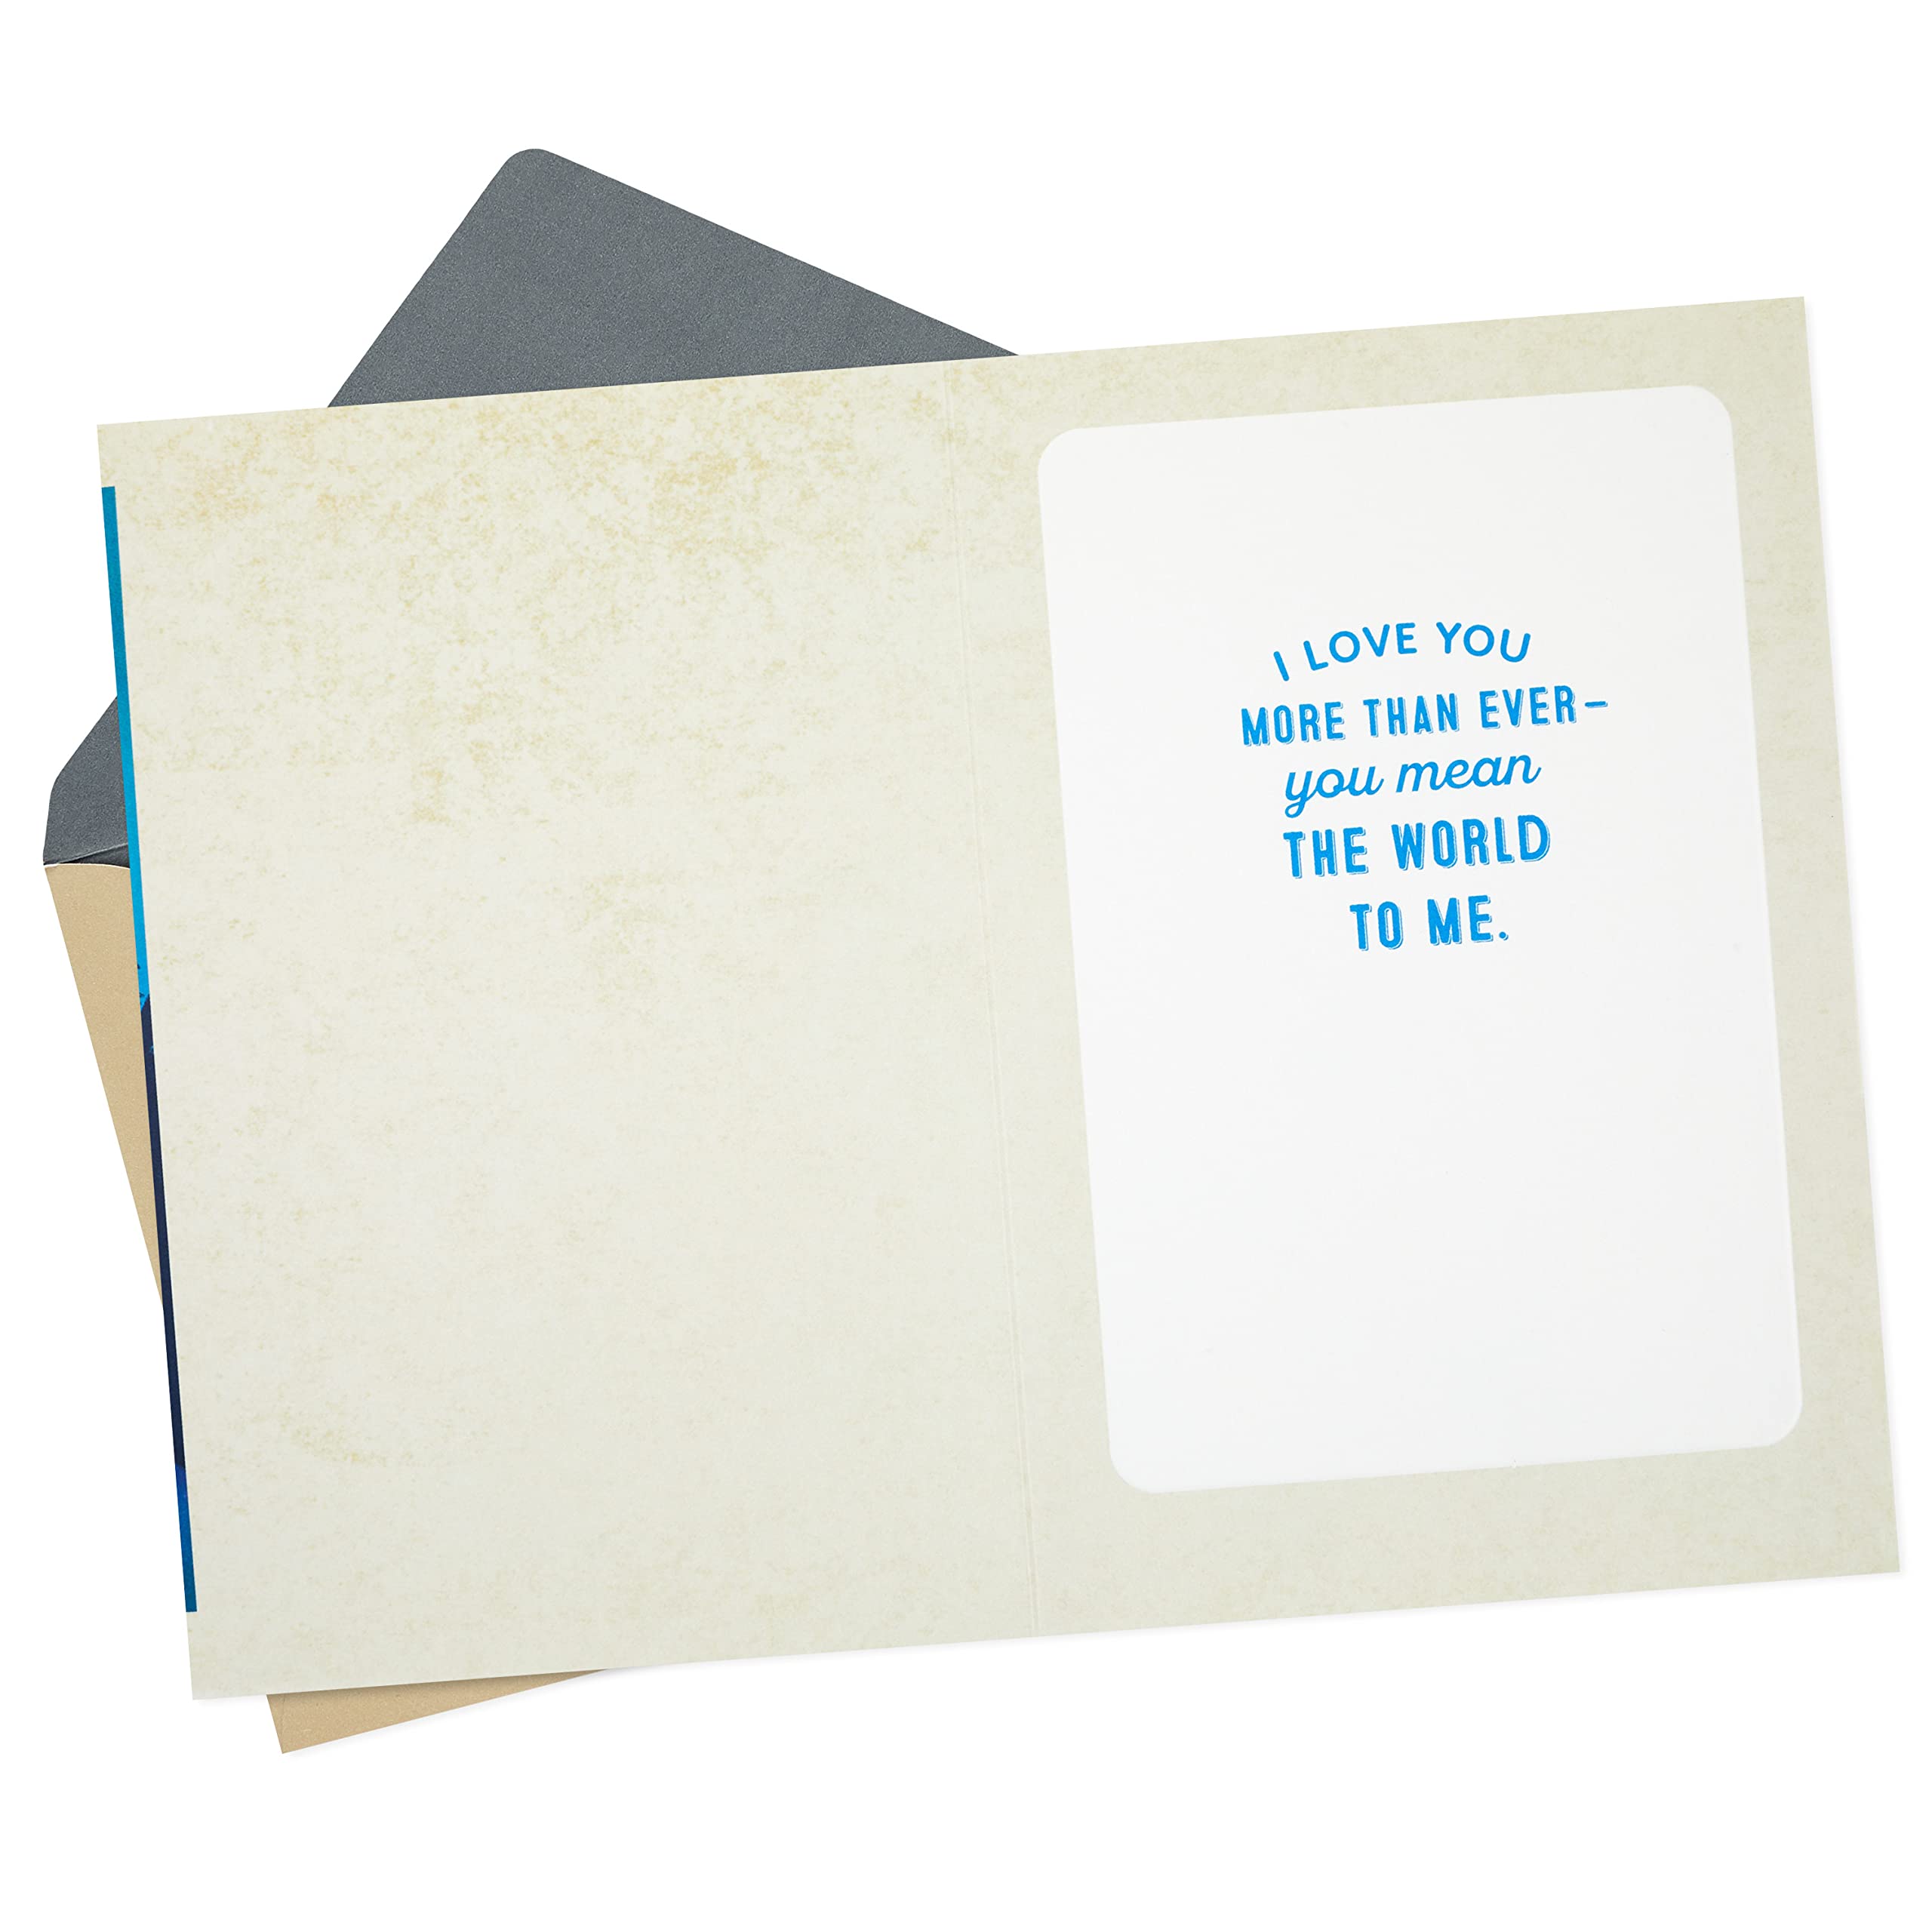 Hallmark Love Card, You Mean the World to Me (Romantic Anniversary Card, Birthday Card, Sweetest Day Card)